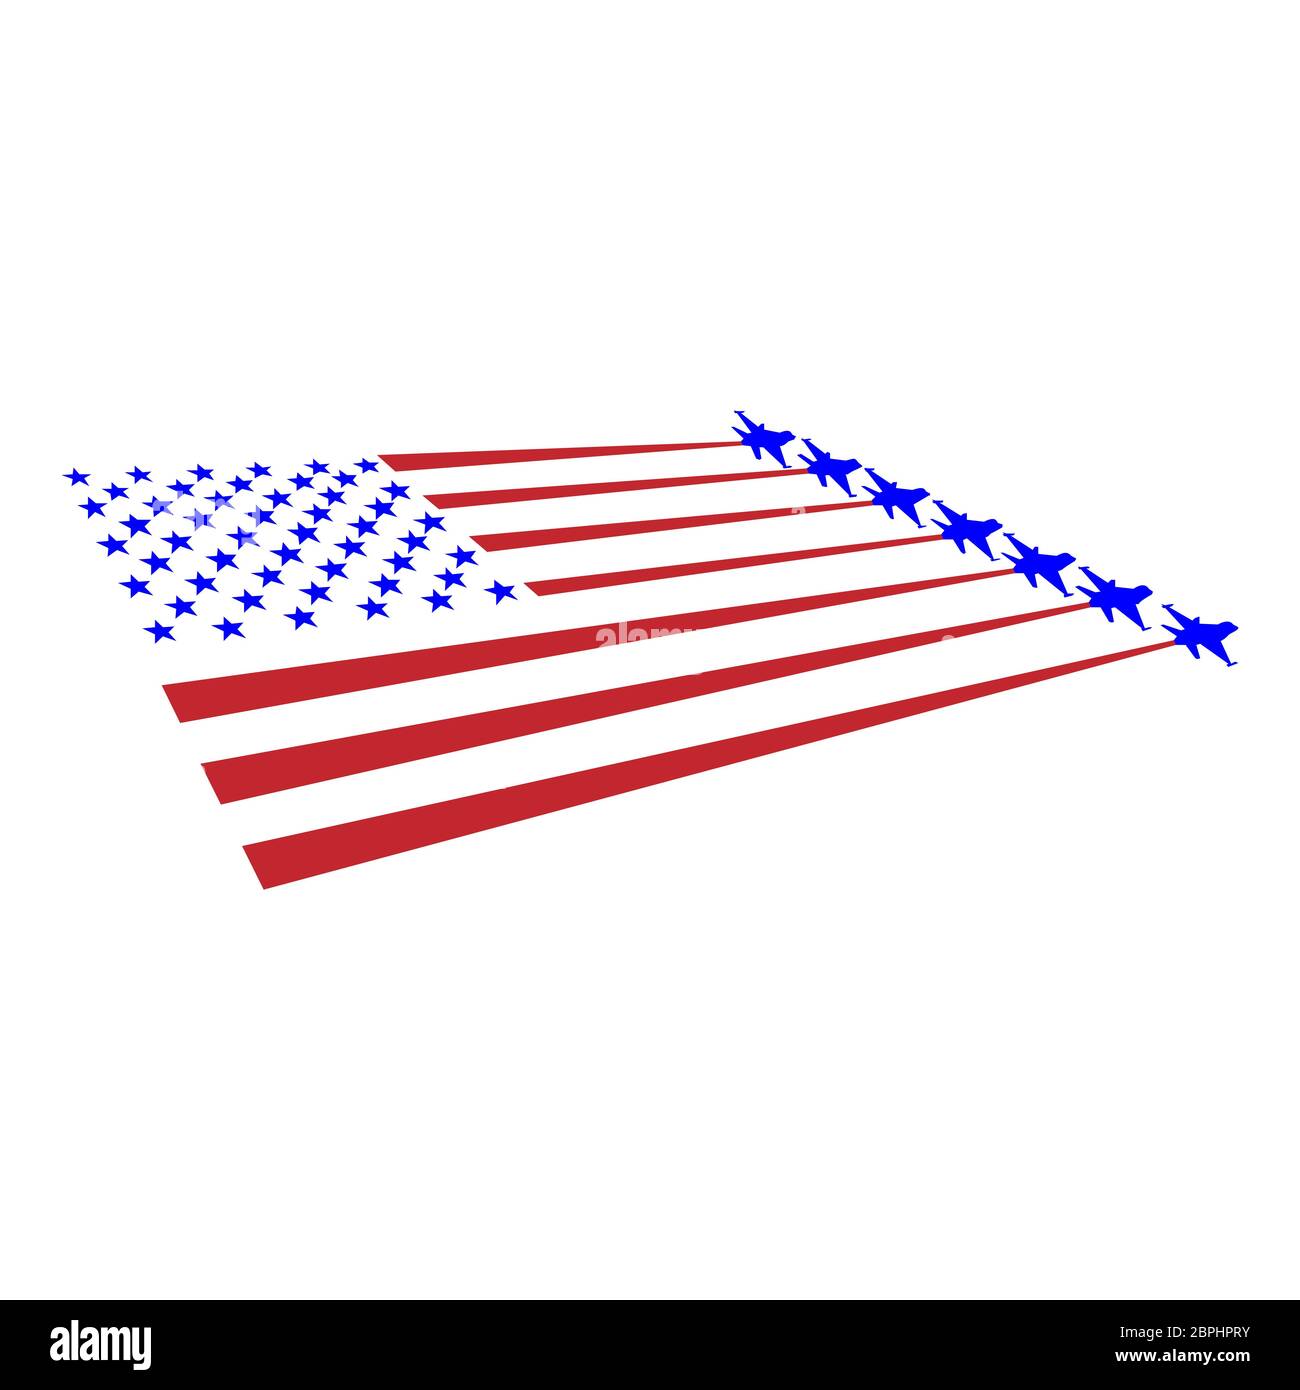 Flag USA and military planes take off from the stripes. Stock Vector